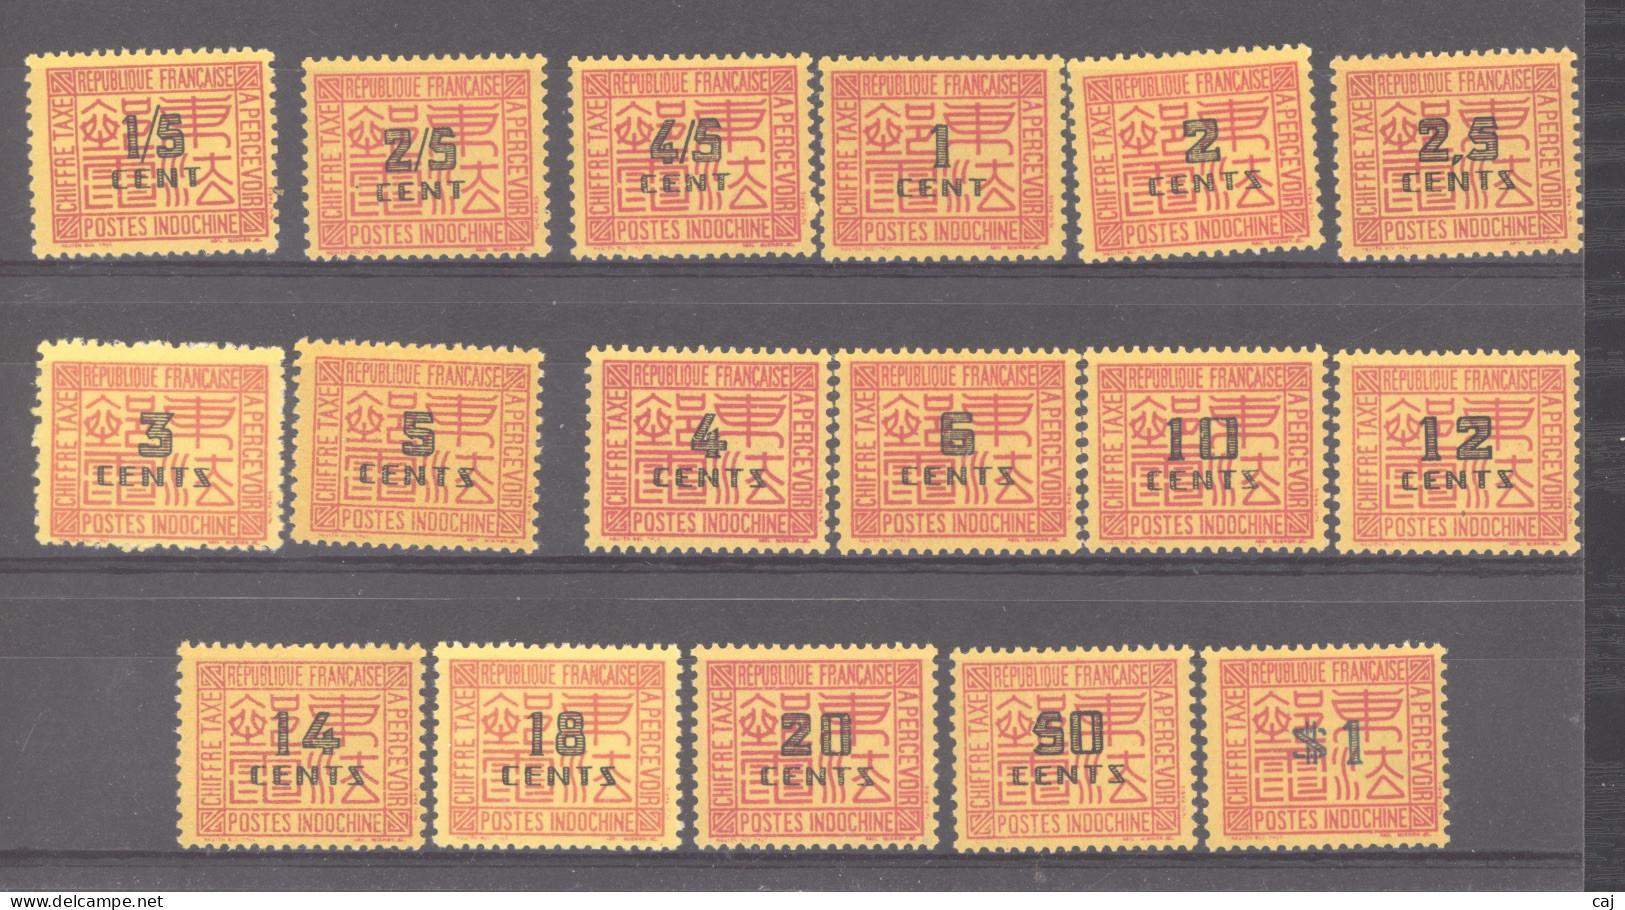 Indochine   -  Taxe  :  Yv  57-73  * - Postage Due